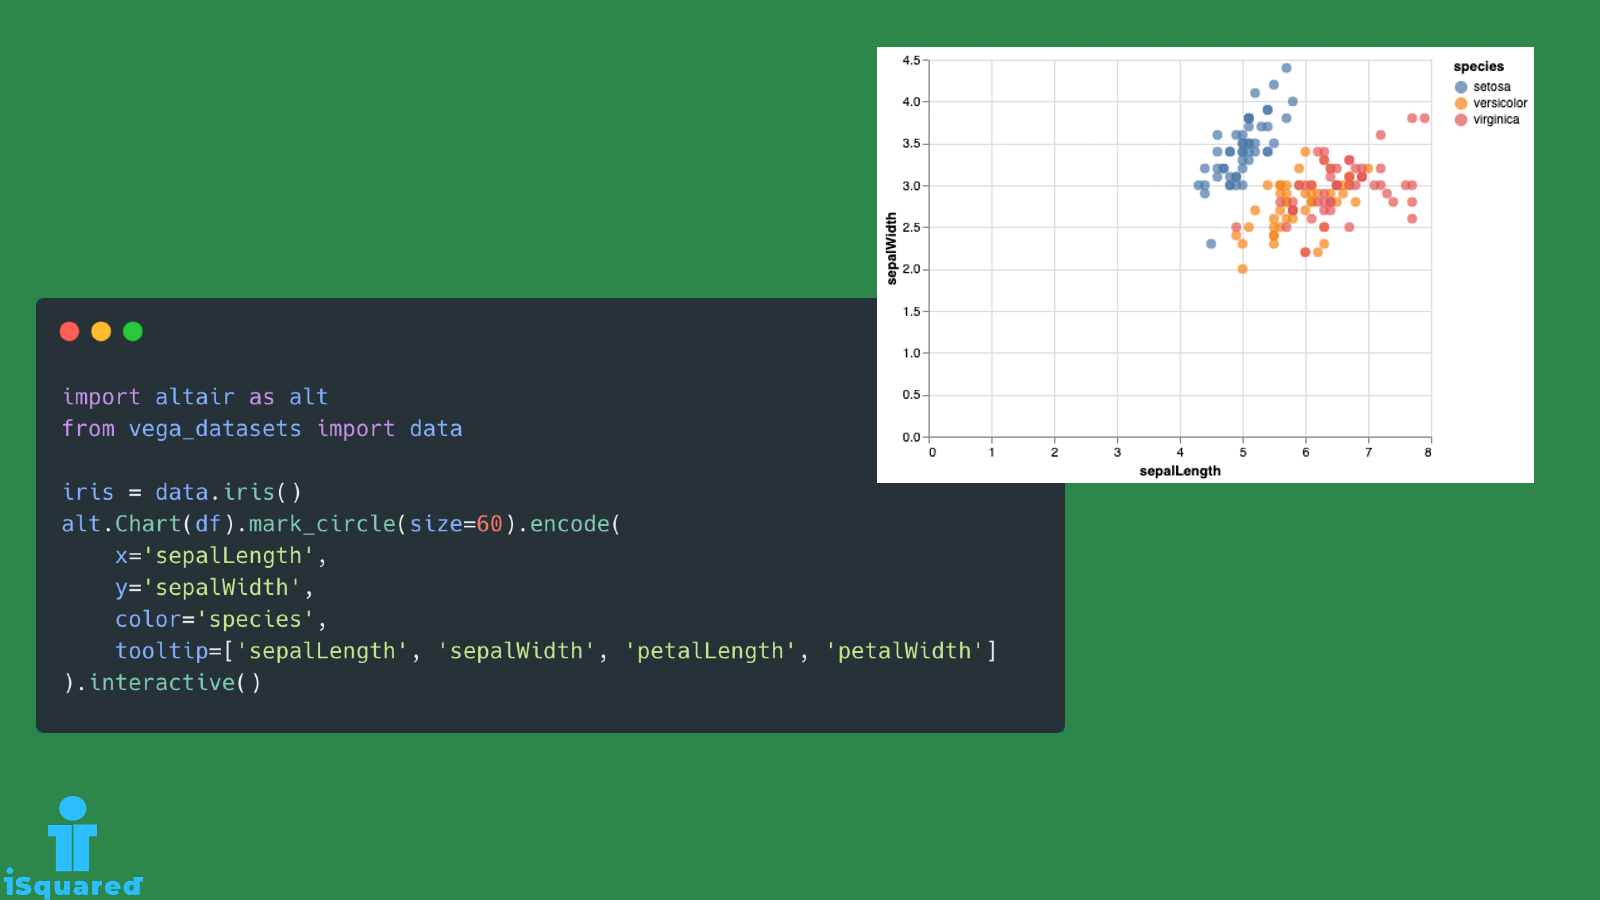 Code and an interactive scatter plot